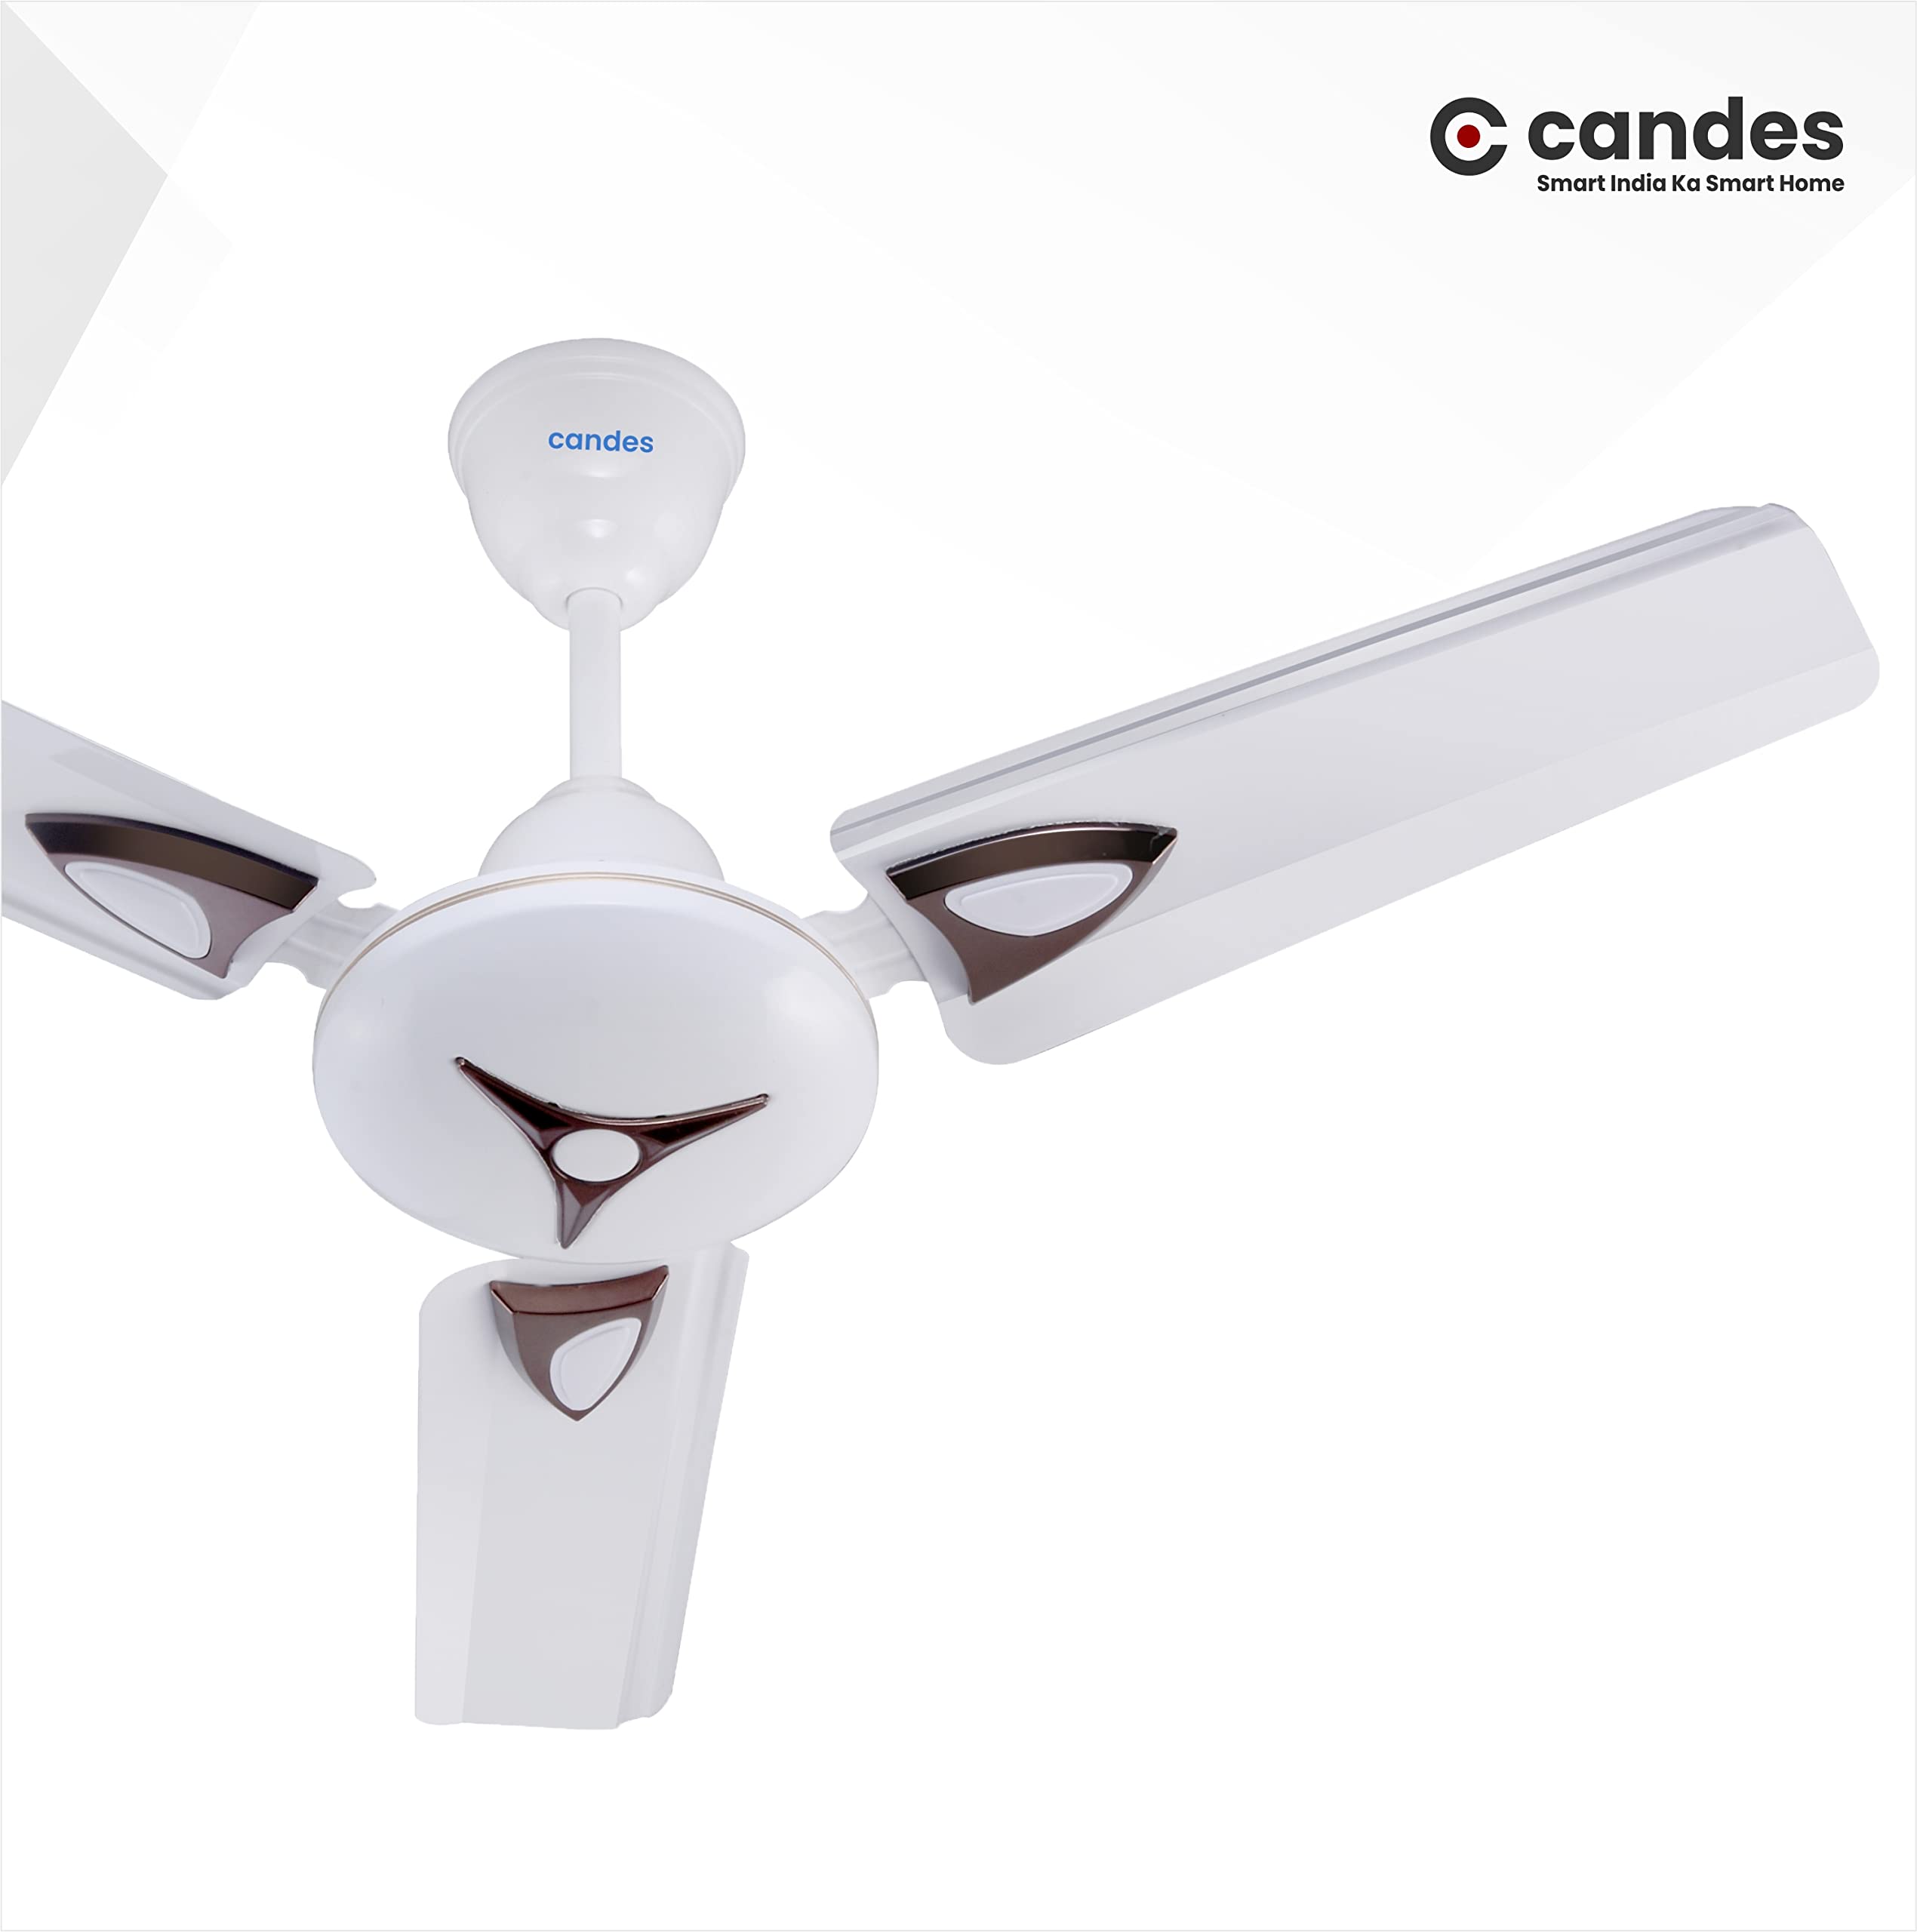 Candes Amaze 900mm /36 inch High Speed Anti-dust Decorative 5 Star Rated Ceiling Fan 440 RPM with 2 Years Warranty (Pack of 2, Ivory)